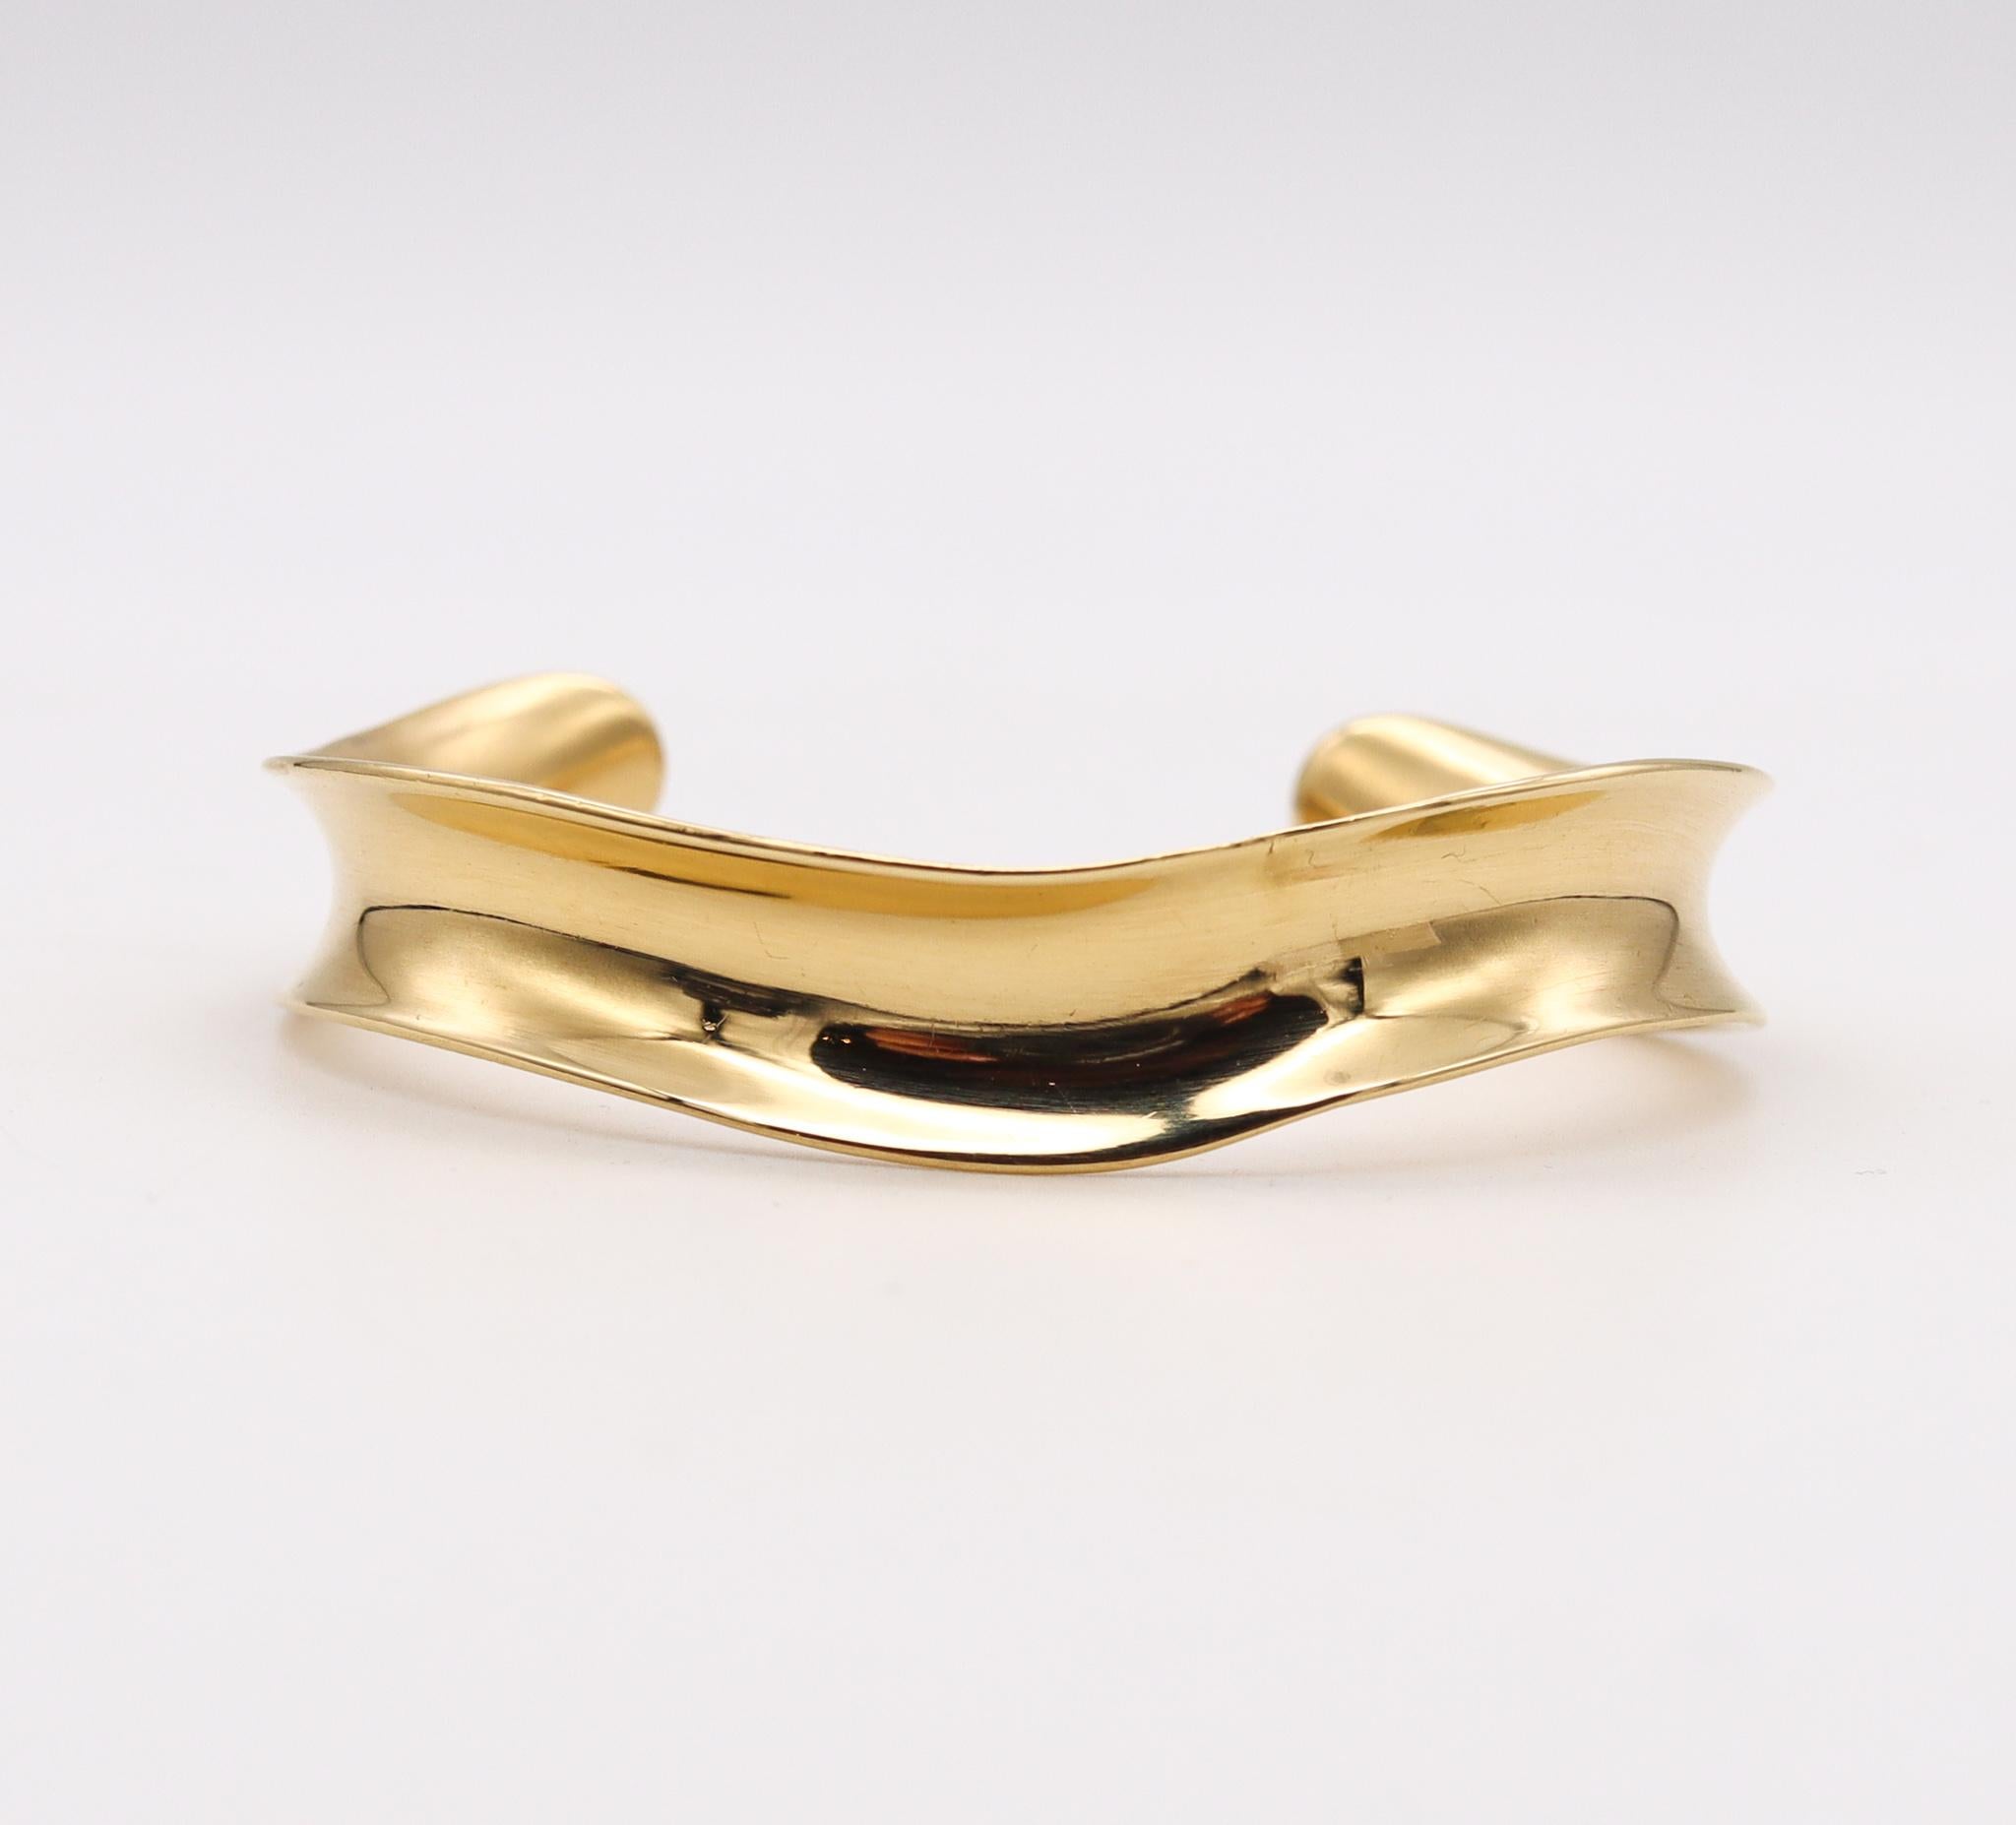 Tiffany & Co 1980 Angela Cummings Wave Cuff Bracelet In Solid 18Kt Yellow Gold In Excellent Condition For Sale In Miami, FL